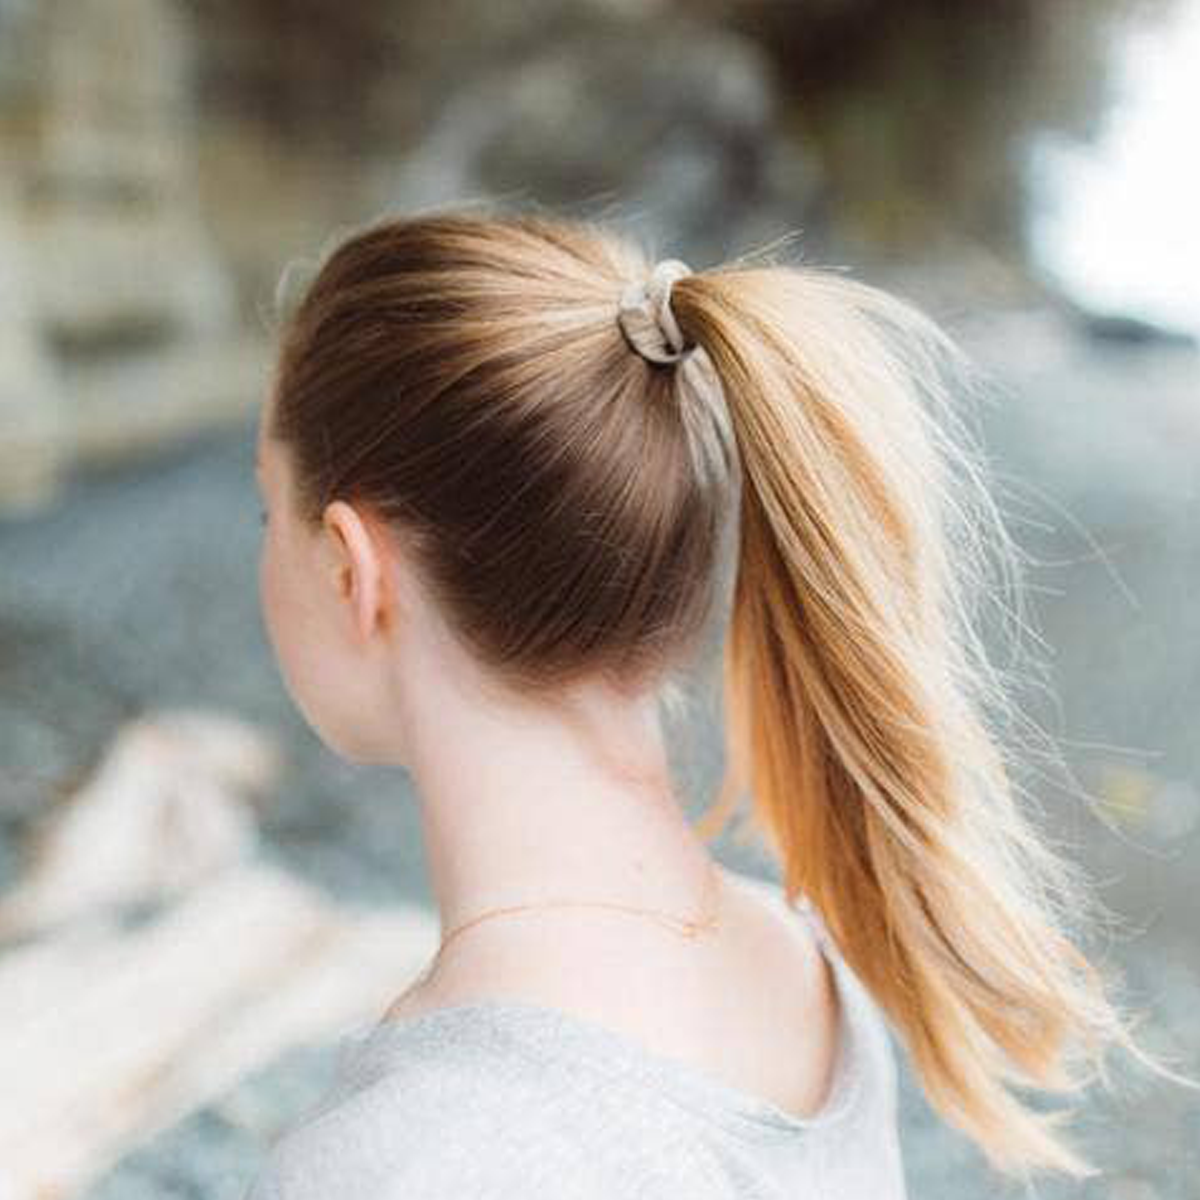 a girl with a pony tail using a plastic free hair tie.